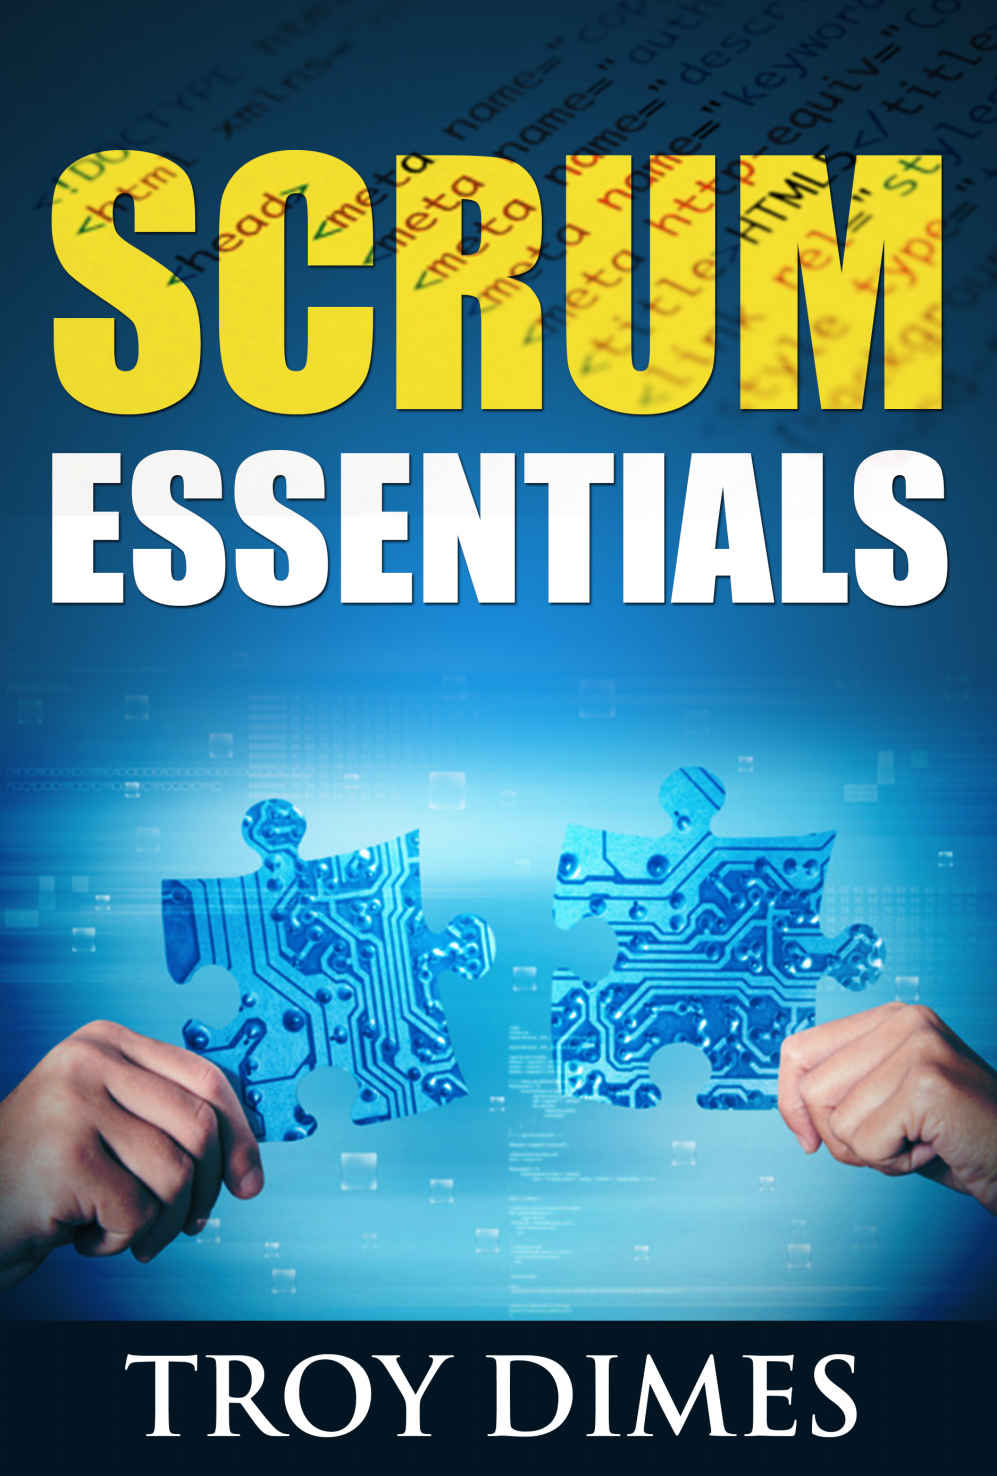 Scrum Essentials: Agile Software Development and Agile Project Management for Project Managers, Scrum Masters, Product Owners, and Stakeholders